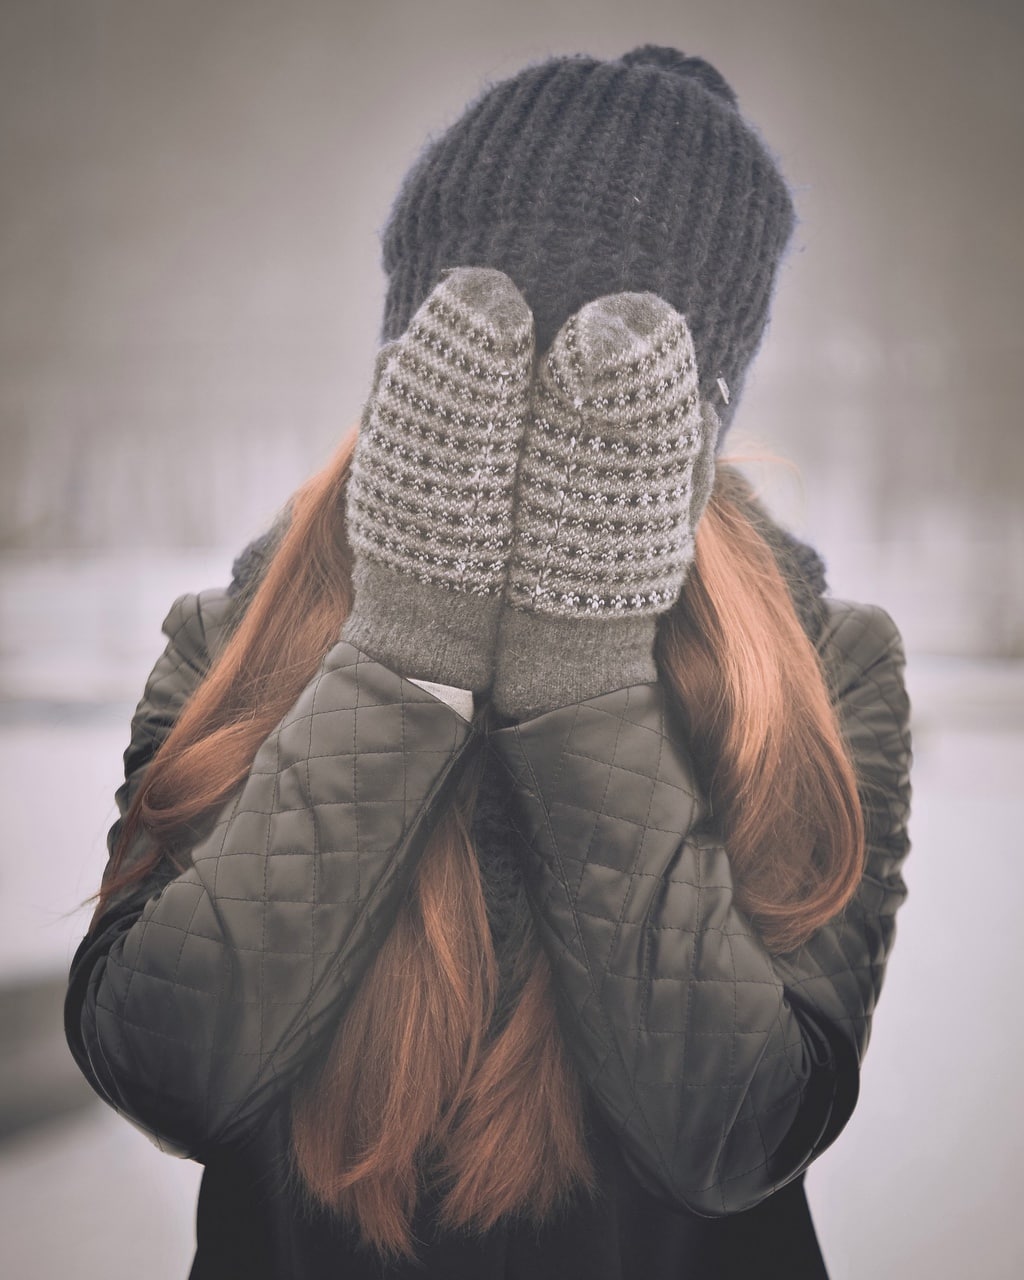 Woman wearing mittens and a quilted leather jacket, covering her face in the winter snow